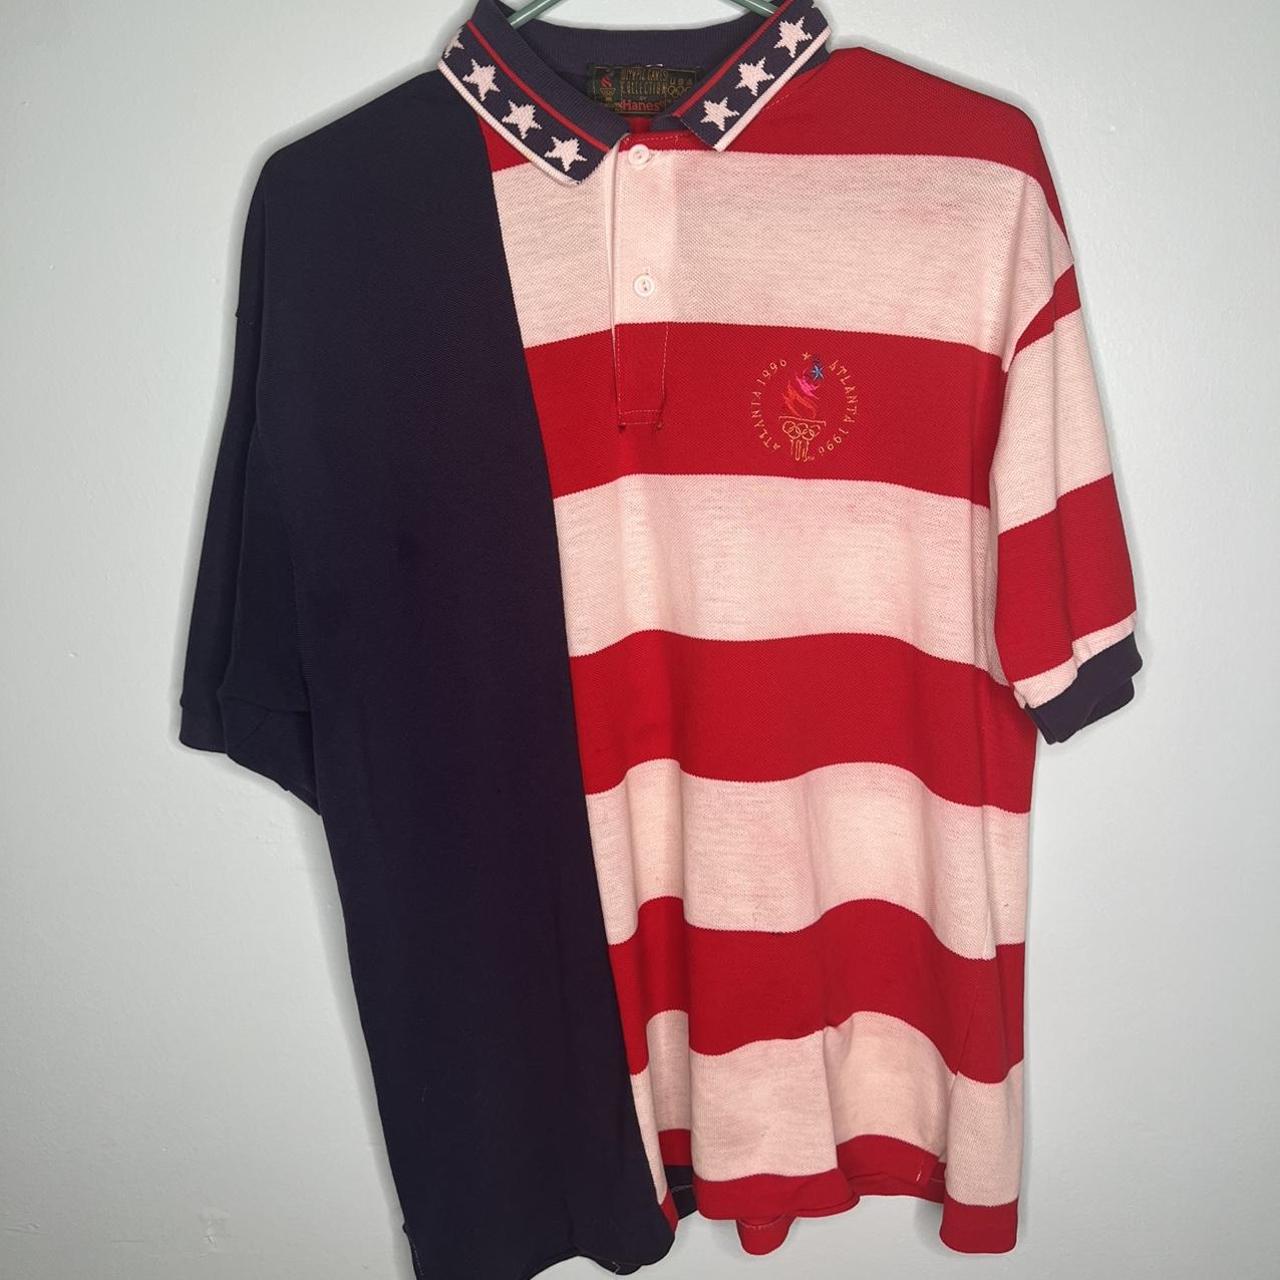 American Vintage Men's Polo Shirt - Red - L